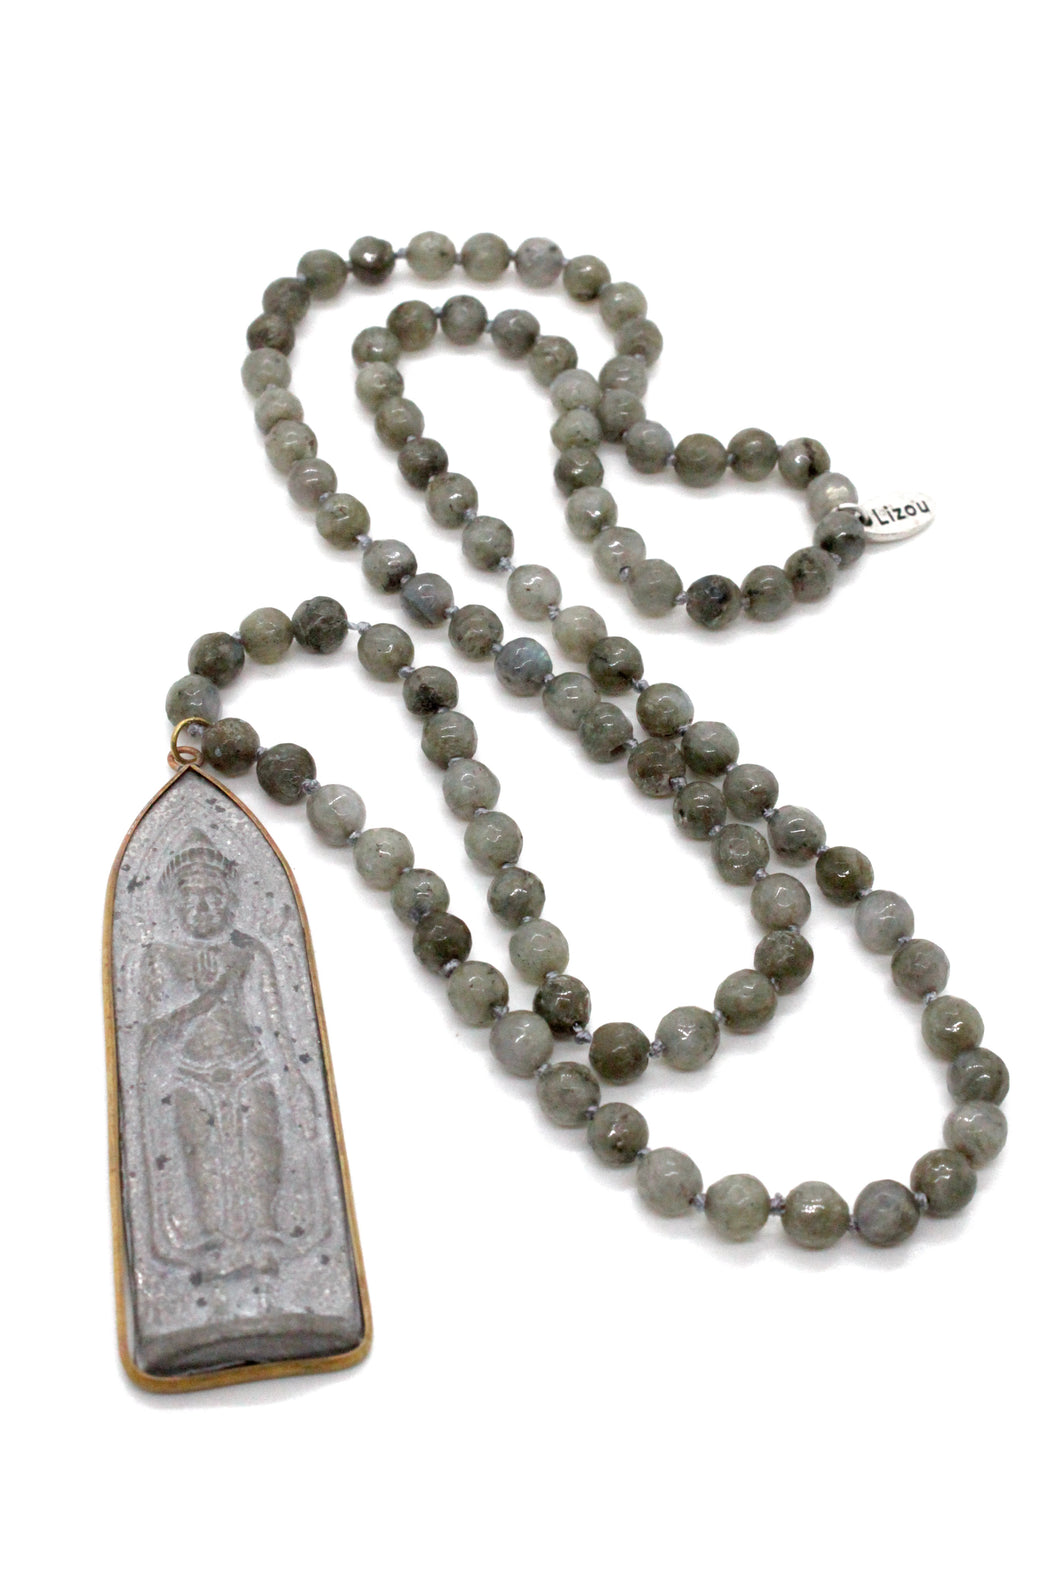 Labradorite Hand Knotted Necklace with Long Buddha Charm NL-LA-AWB1 -The Buddha Collection-